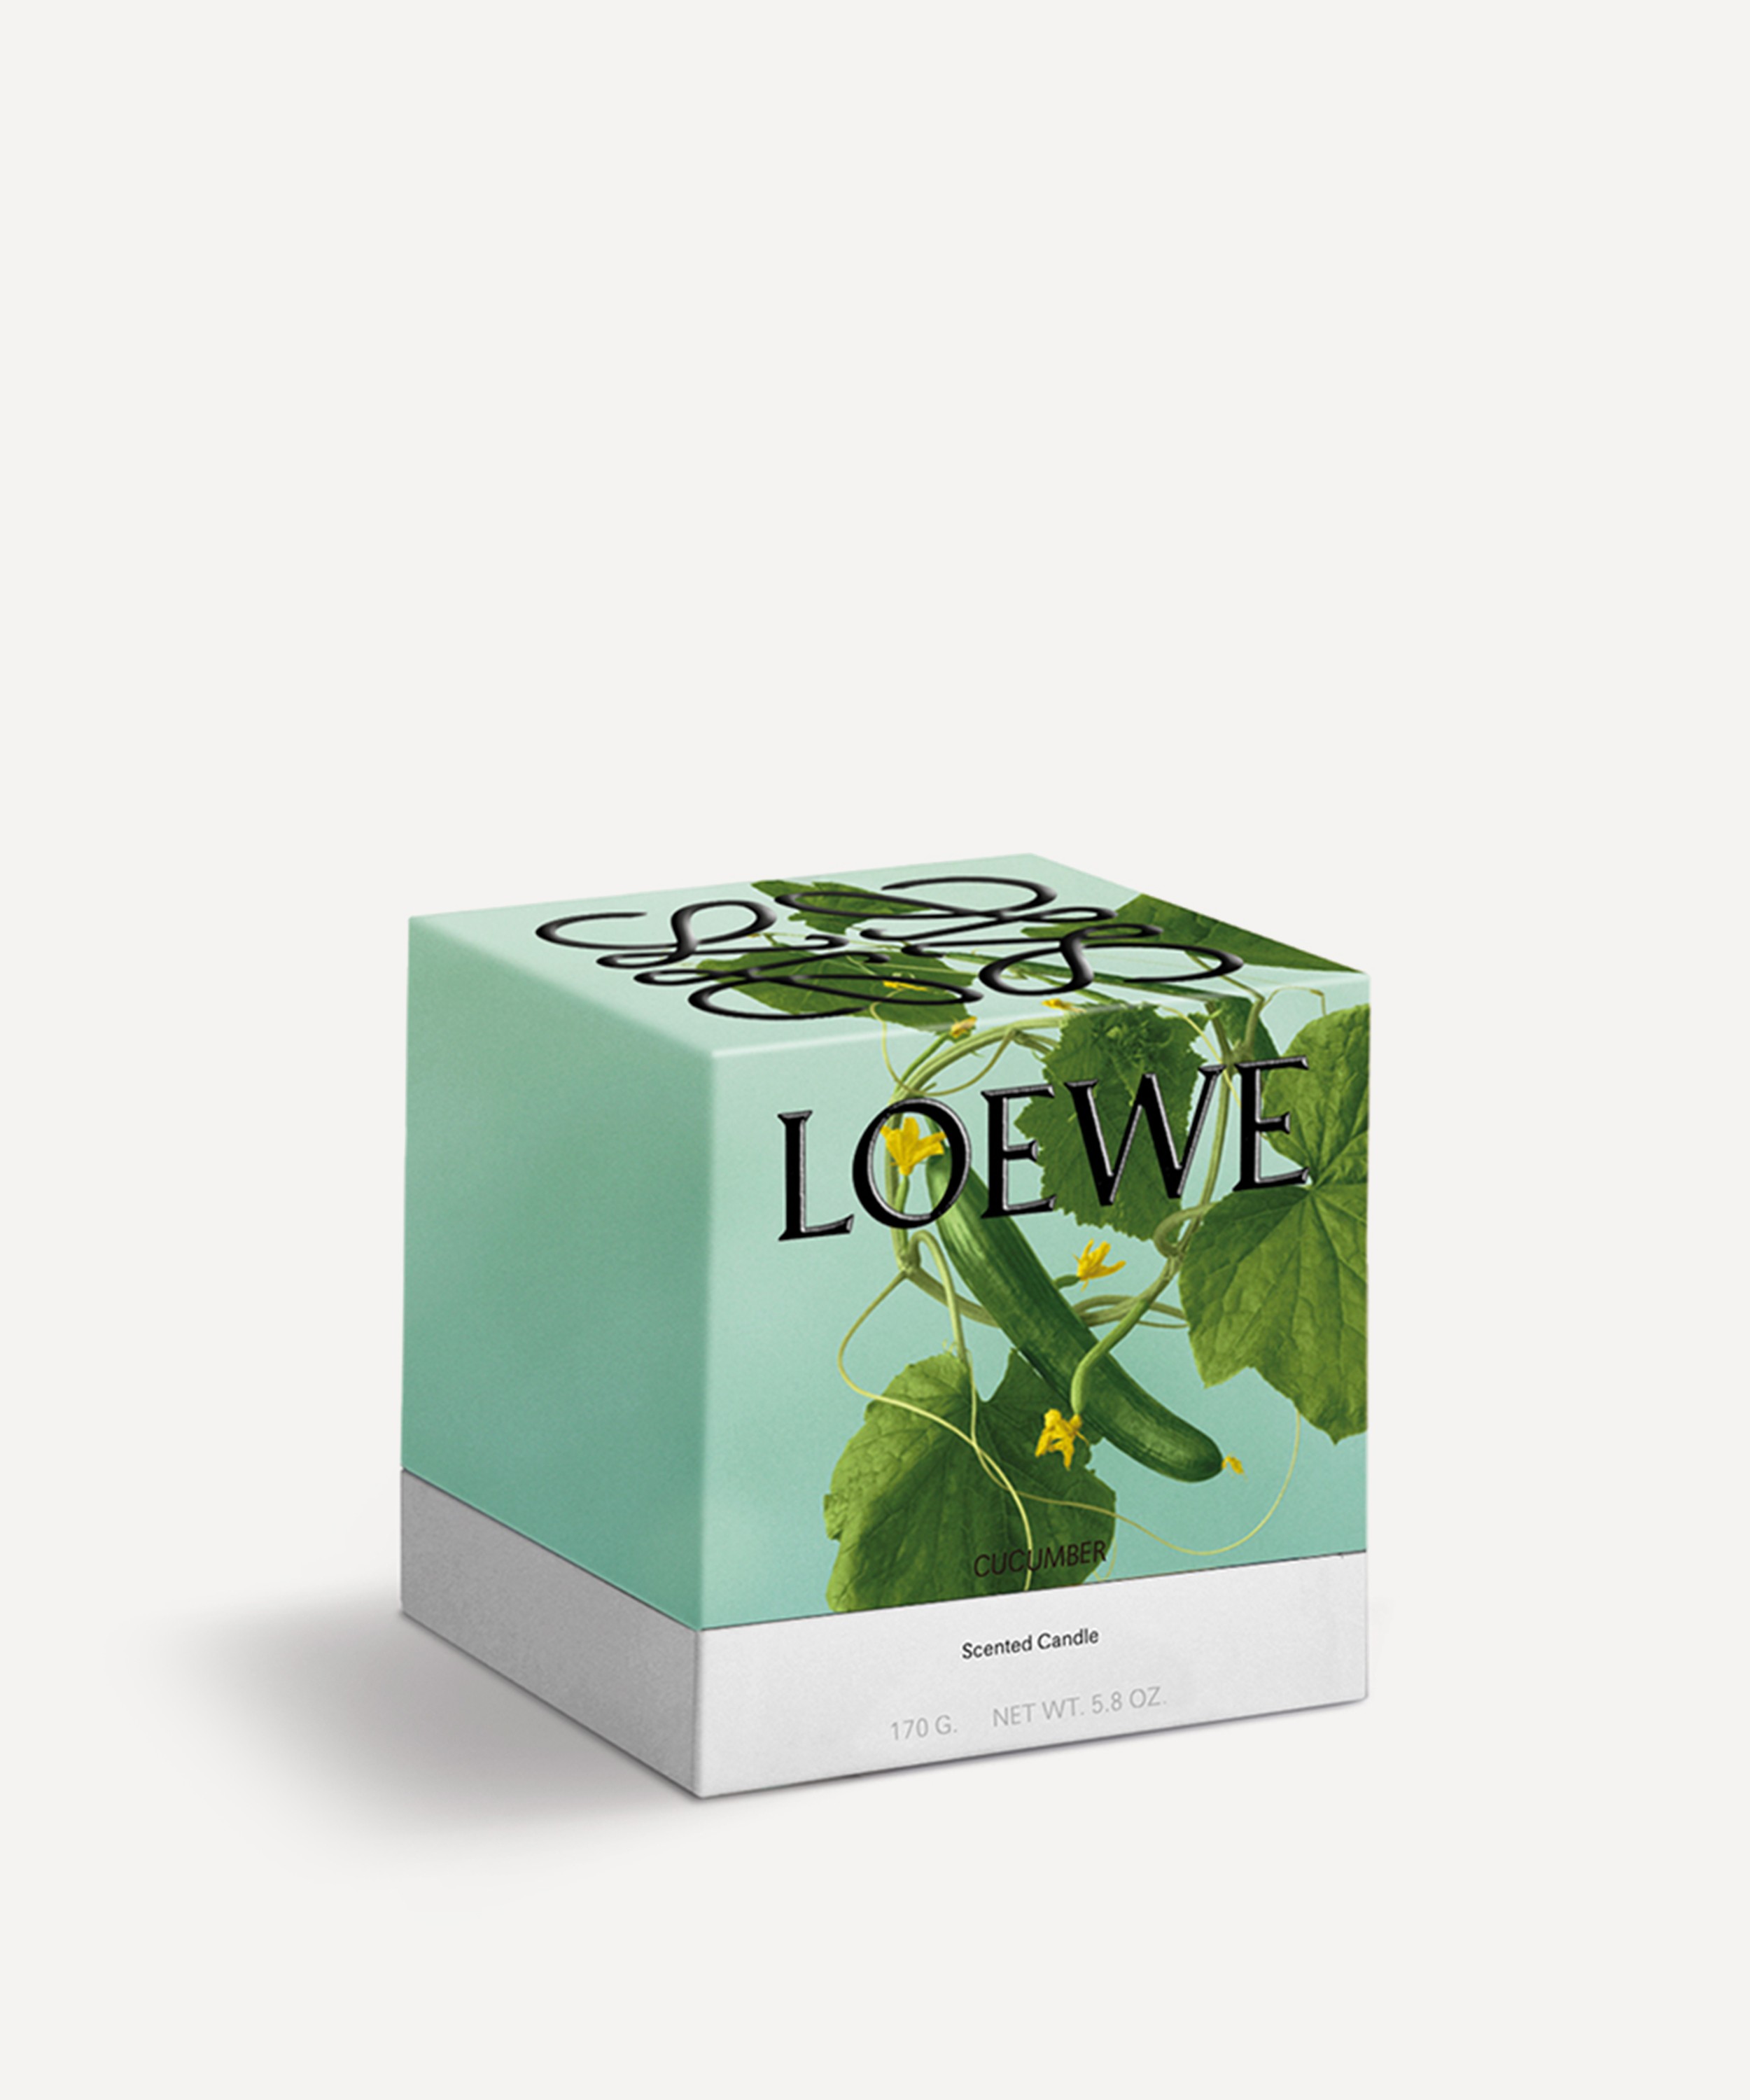 Loewe - Small Cucumber Candle 170g image number 4